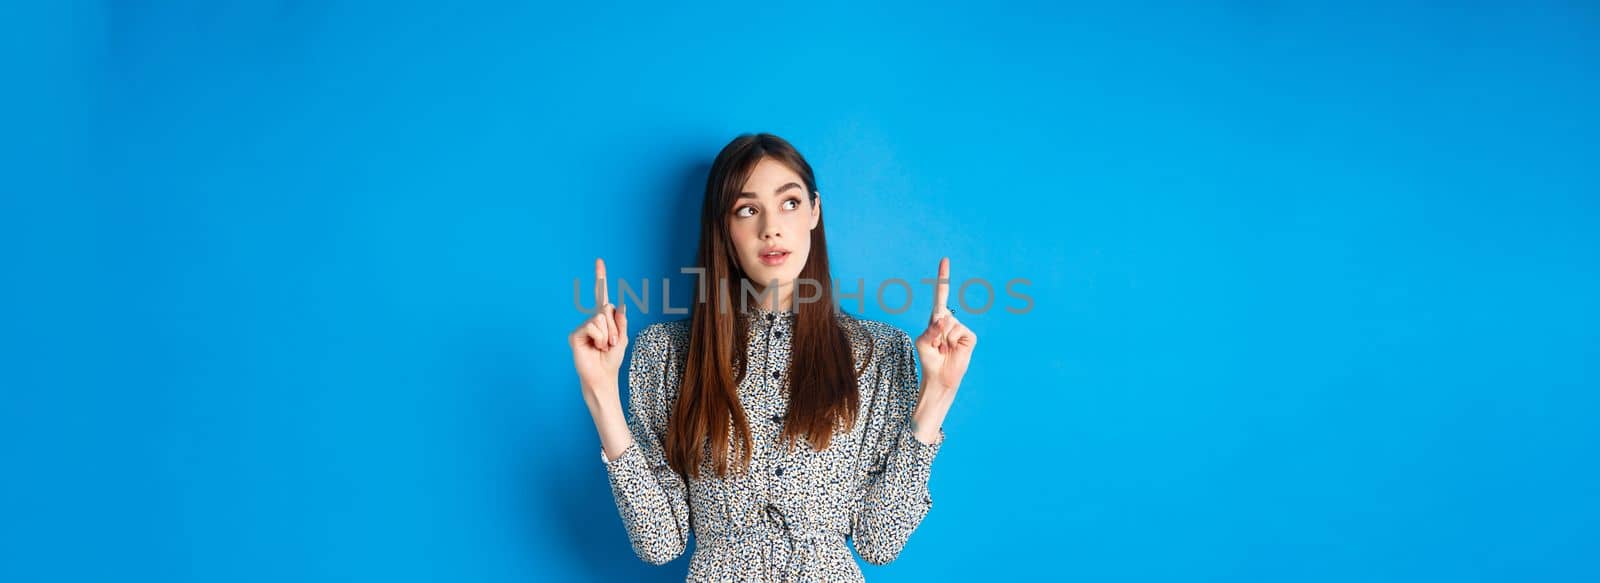 Pretty thoughtful woman pointing fingers up and thinking, standing pensive in dress on blue background.